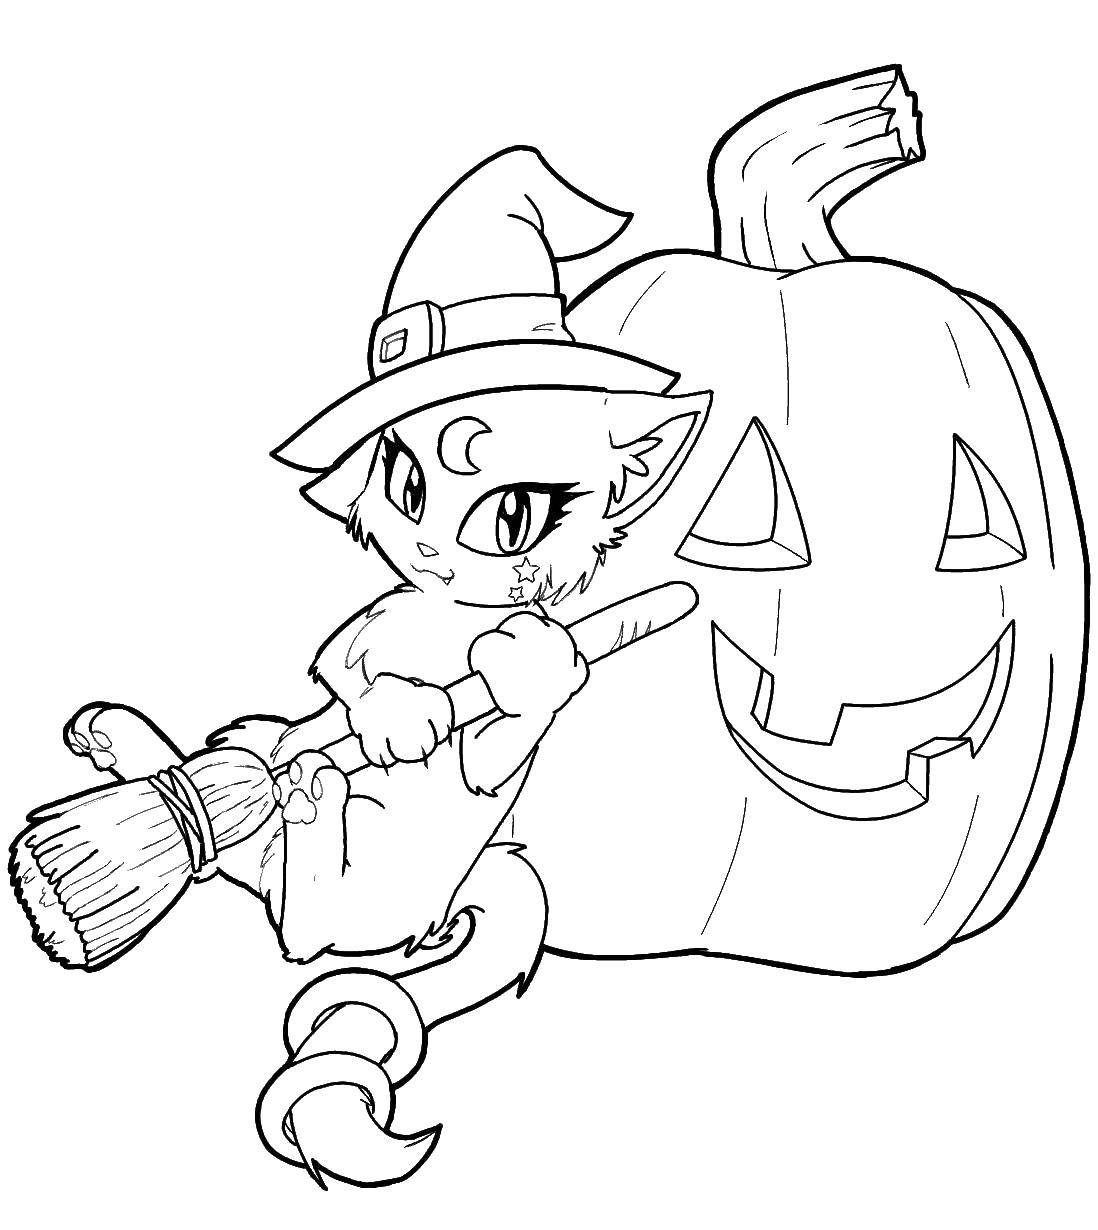 Coloring Witch cat. Category witch. Tags:  witch, Halloween.